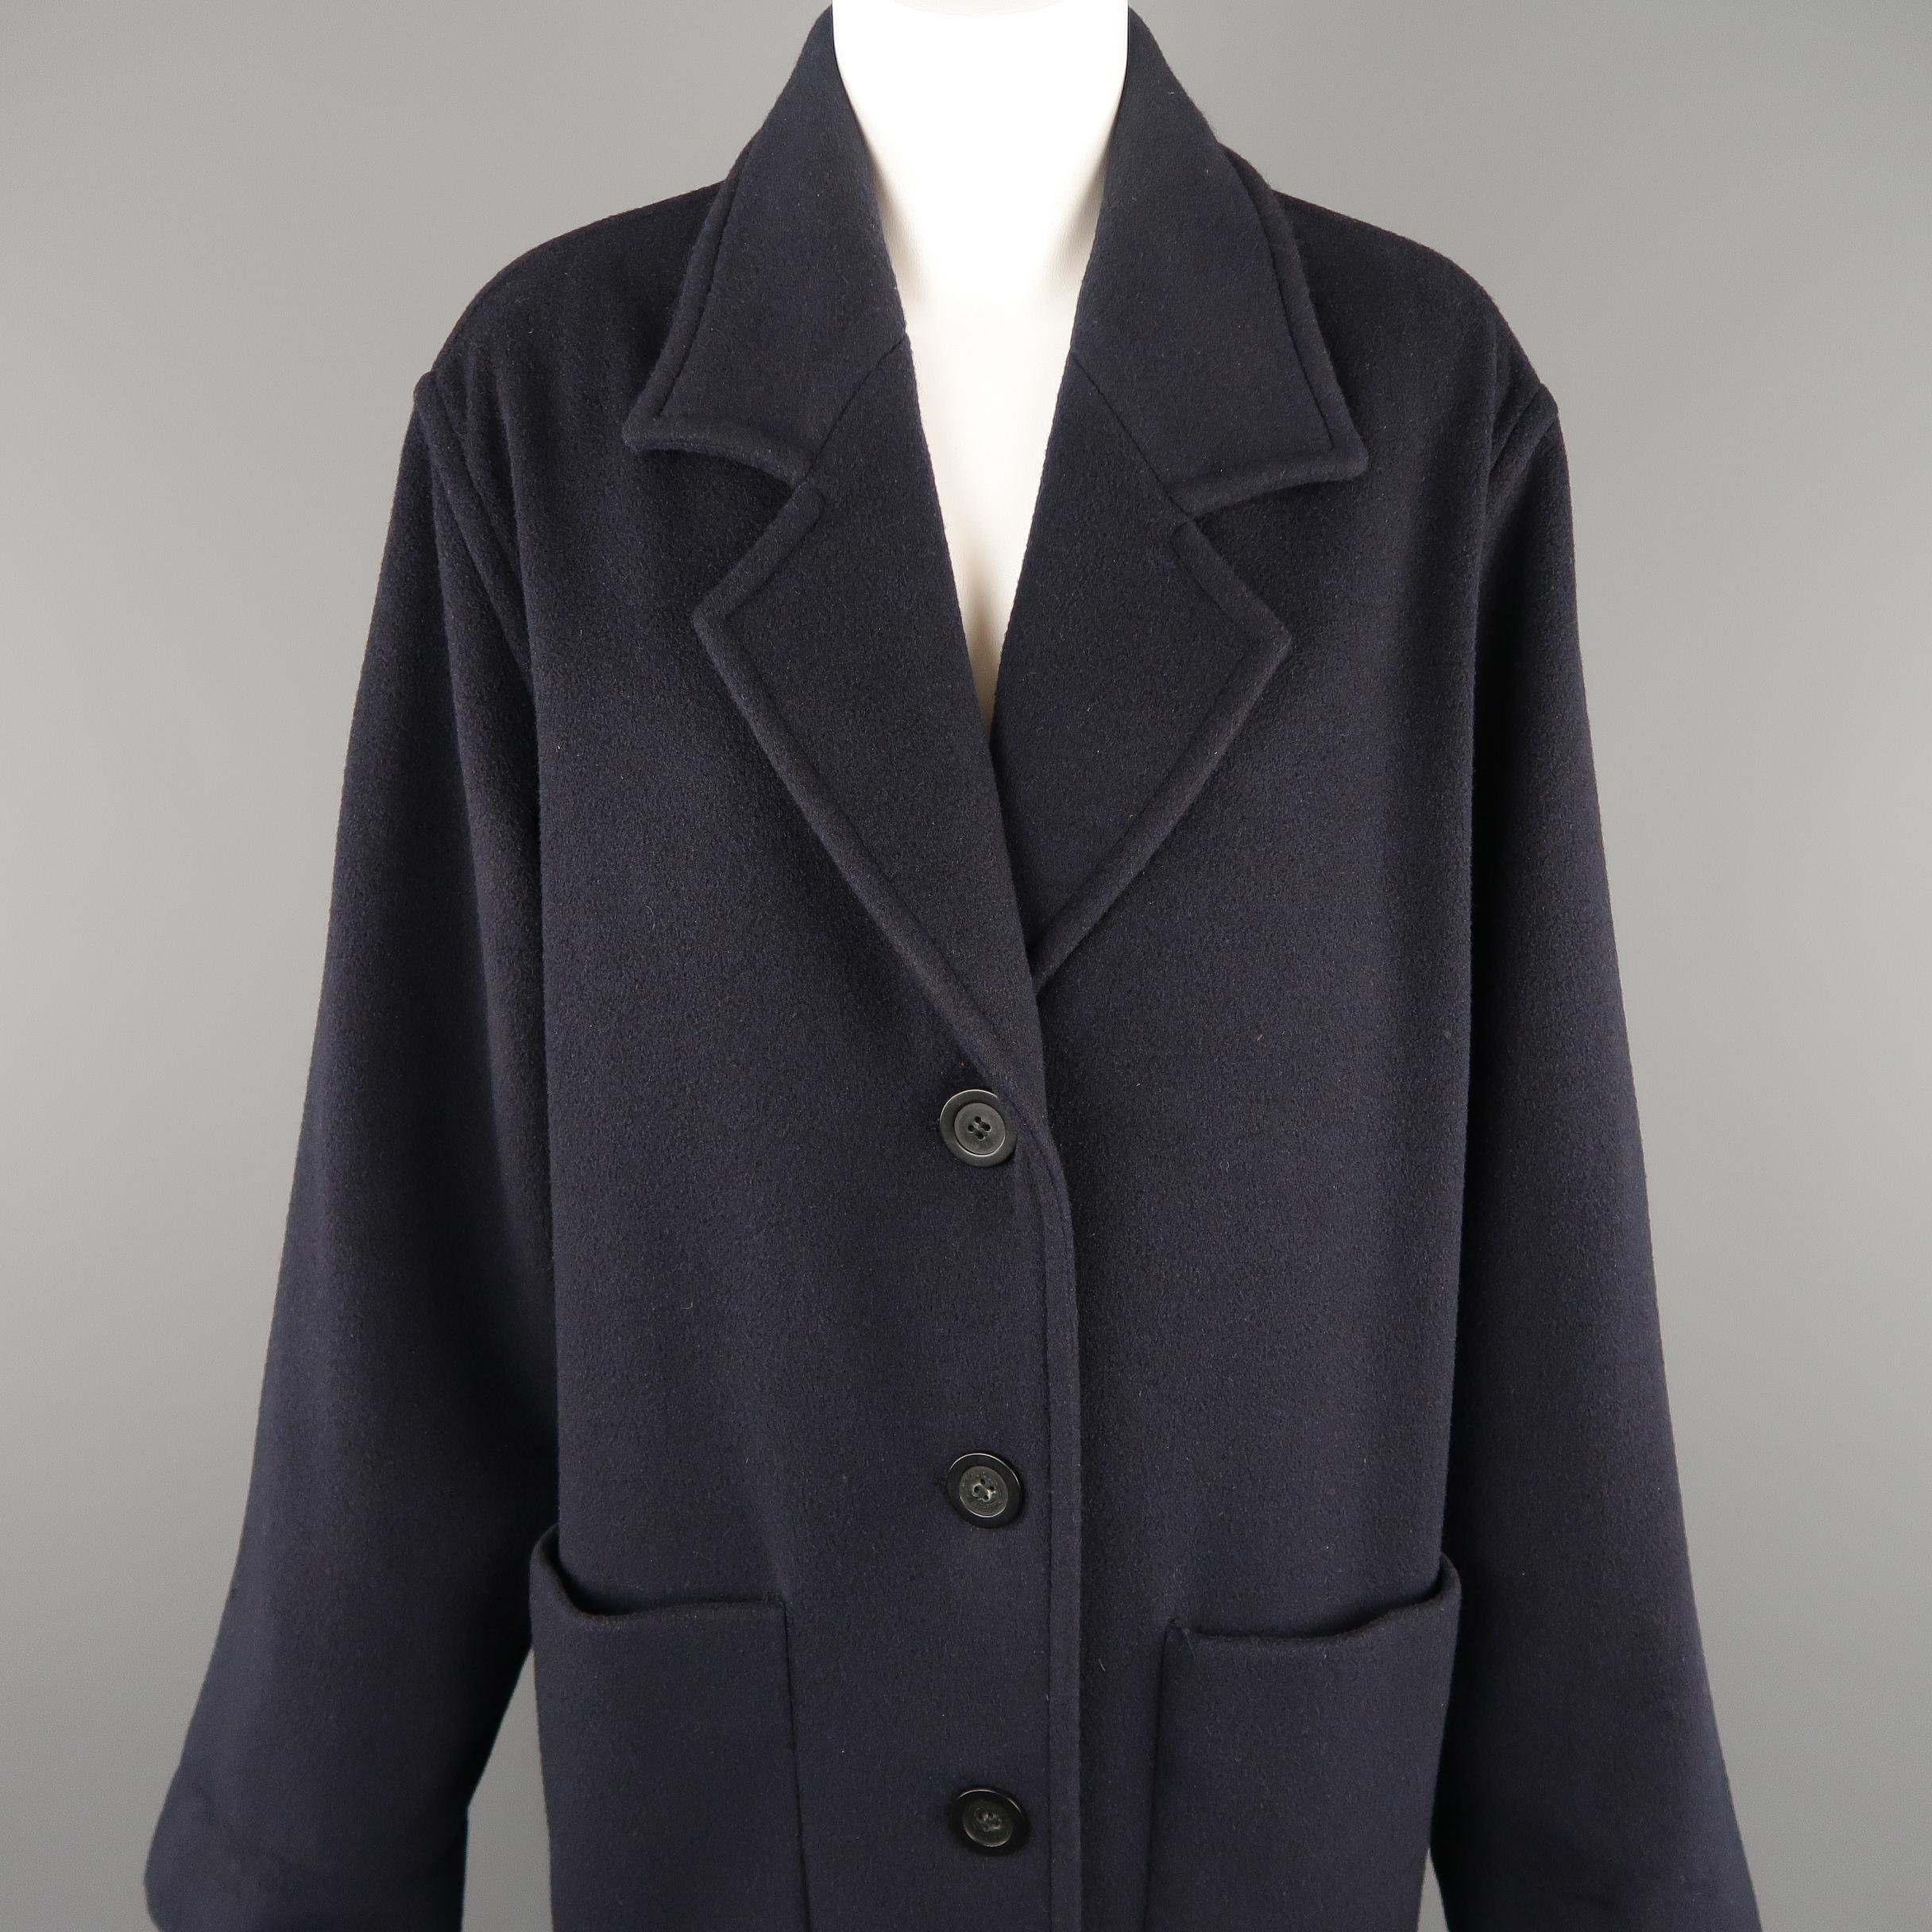 TSE overcoat comes in navy blue cashmere with a pointed lapel, single breasted four button closure, and patch pockets. Made in Italy.
 
Excellent Pre-Owned Condition.
Marked: M
 
Measurements:
 

    Shoulder: 18 in.
    Bust: 48 in.
    Waist: 48